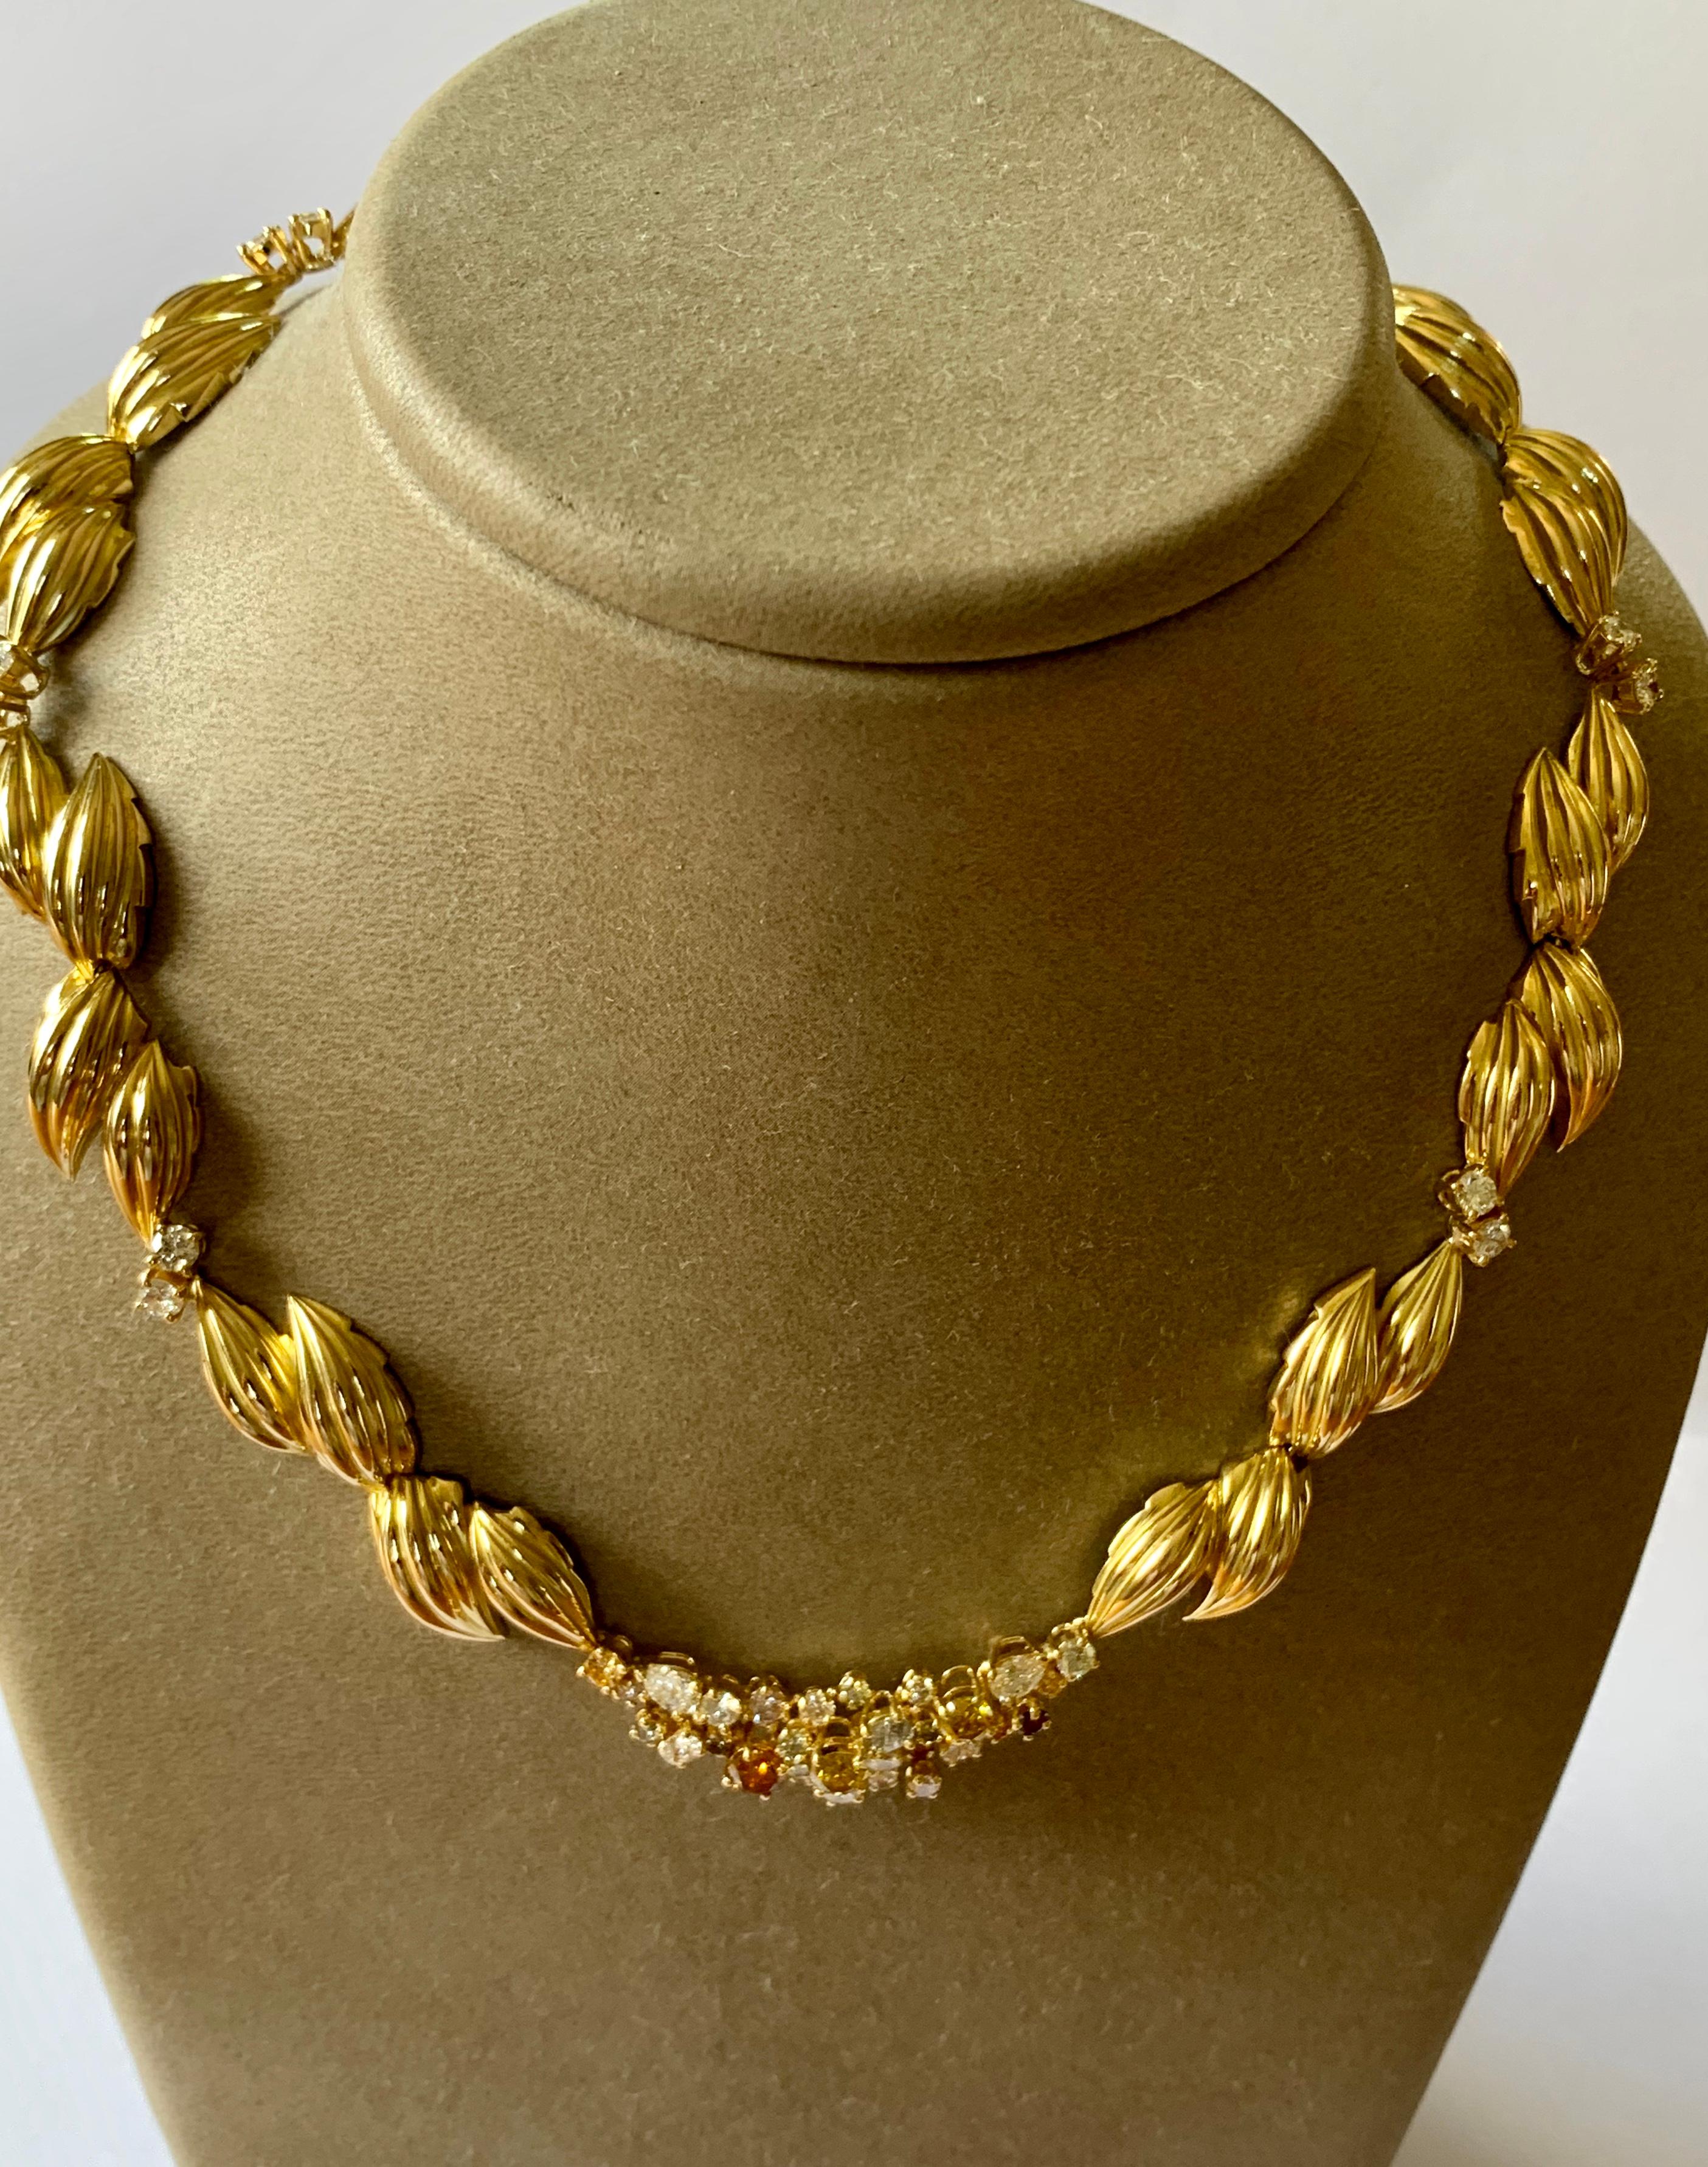 A masterfully crafted necklace with a leaf design from solid 18 Karat Yellow Gold. It is accentuated with 46 white and fancy colored Diamonds weighing circa 5.60 ct. The necklace measures approximately 16 inches in length by 3/4 inches in width.